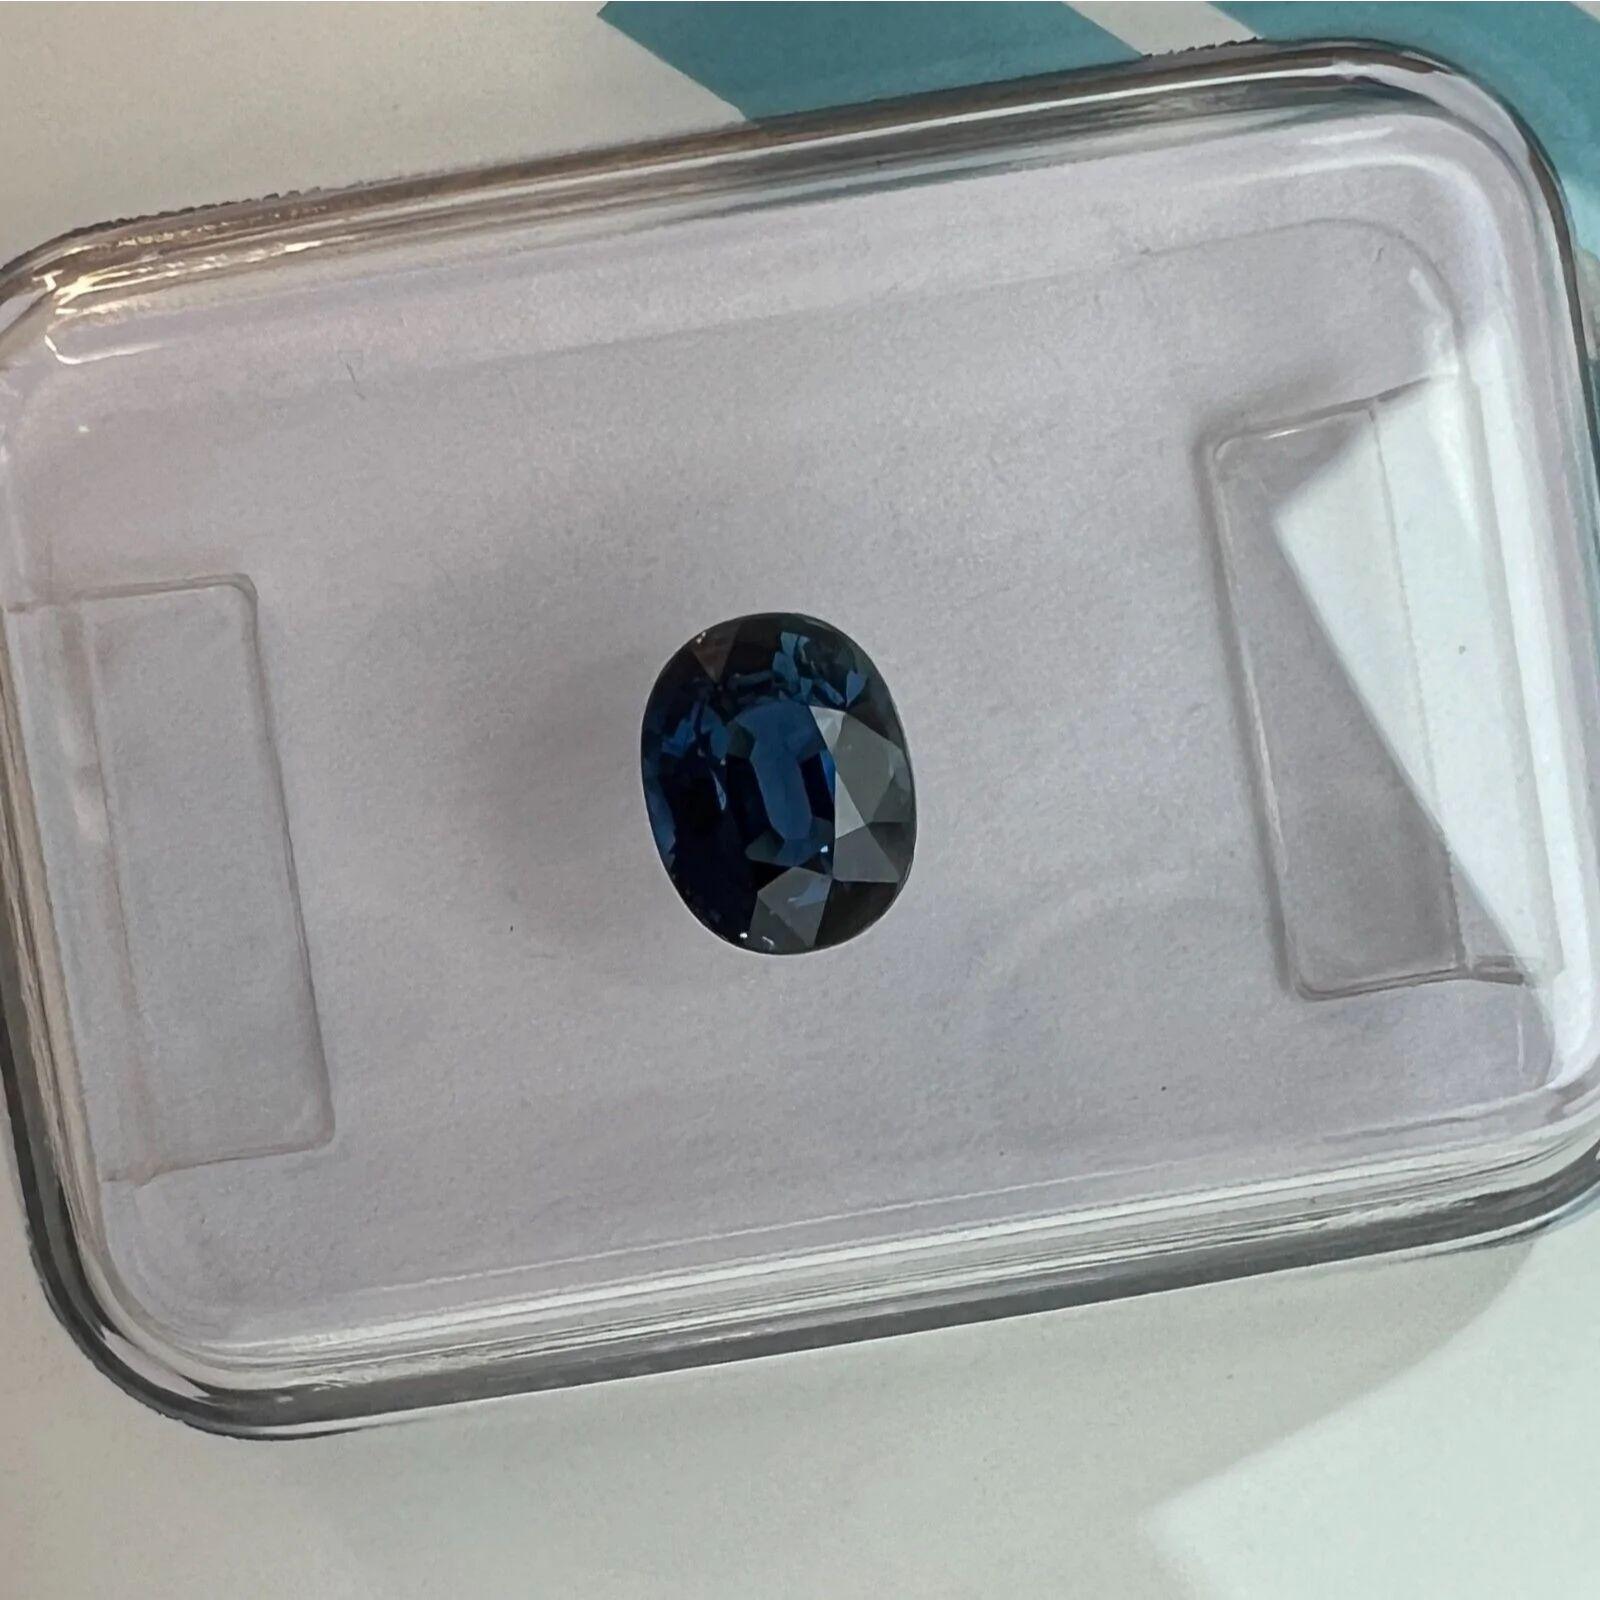 Untreated Cushion Cut Blue Sapphire 0.63ct IGI Certified Loose Gem 5.4x4.3mm

Natural Untreated Deep Blue Sapphire Gemstone IGI Certified.
0.63 Carat stone with an excellent cushion cut and excellent clarity, a very clean stone.
Fully certified by